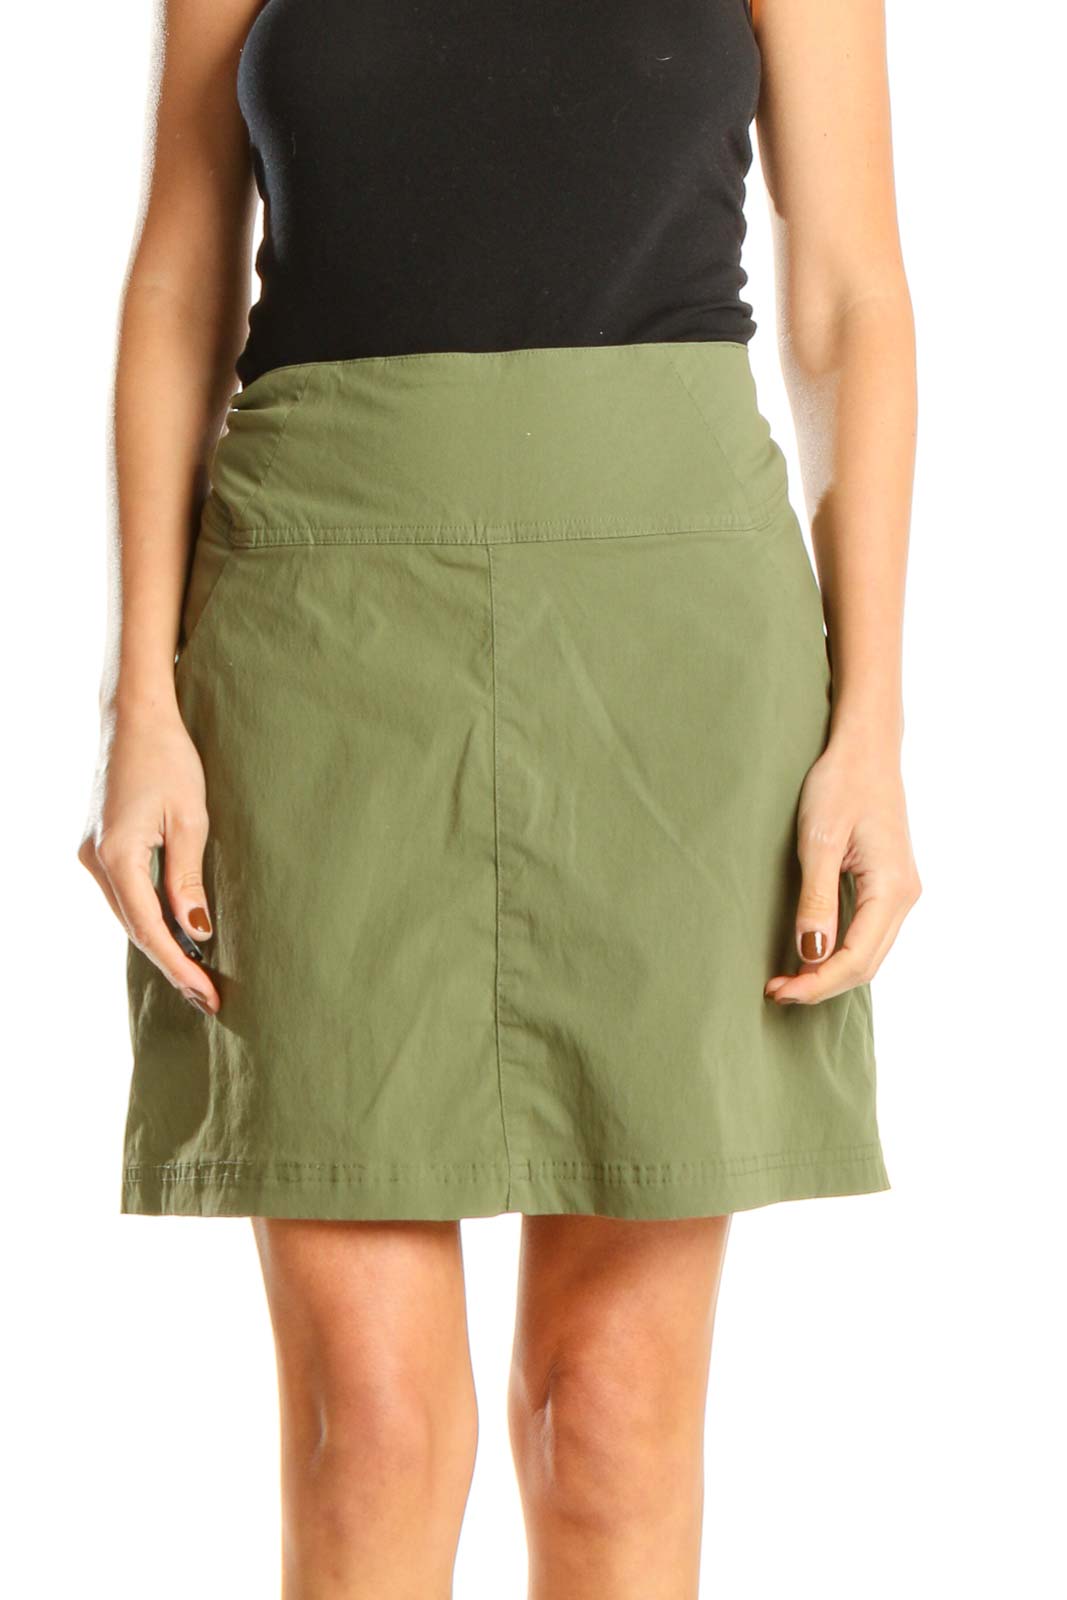 Green Solid Casual A-Line Skirt Front